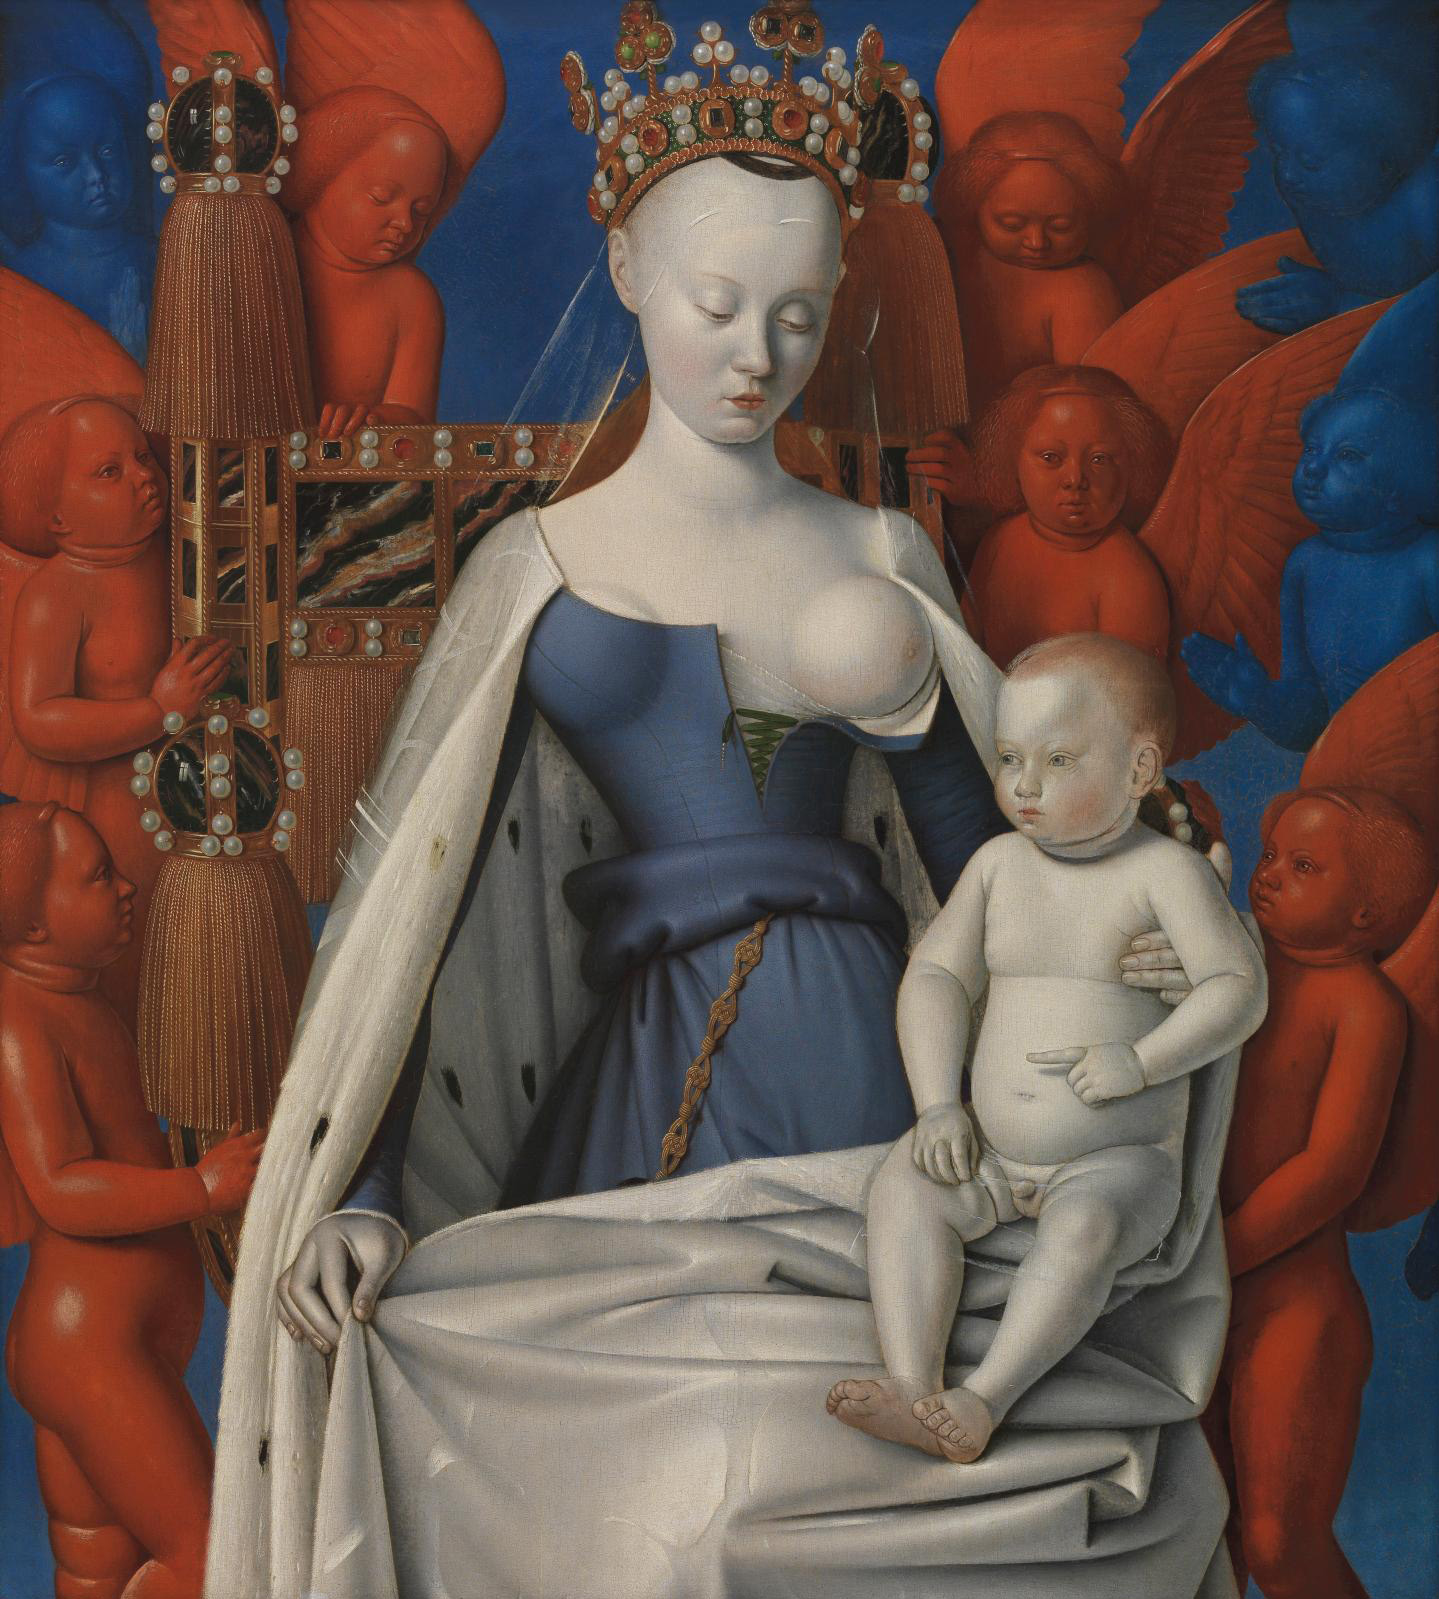 Jean Fouquet (c. 1420-1478/1481), The Virgin and Child with Angels (detail), c. 1450, painting on wood.
© KMSKA